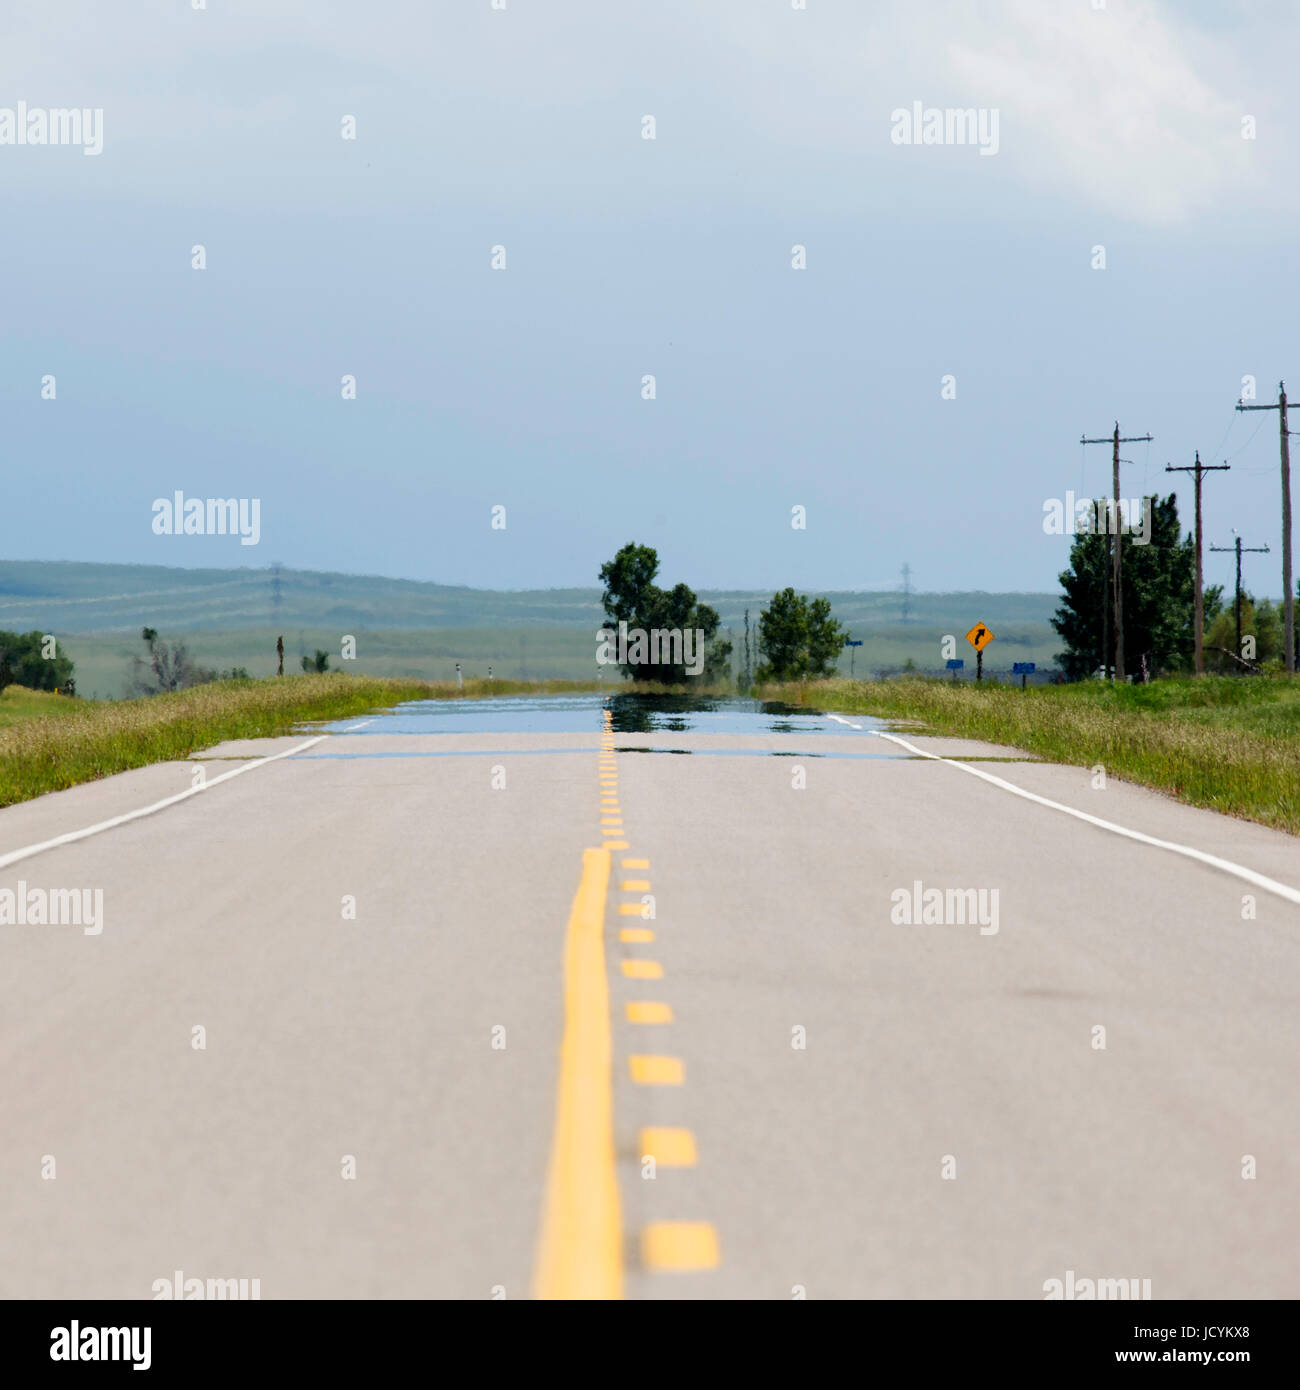 Empty road in Alberta, Canada. The tarmac on the highway has yellow lane markings. Stock Photo